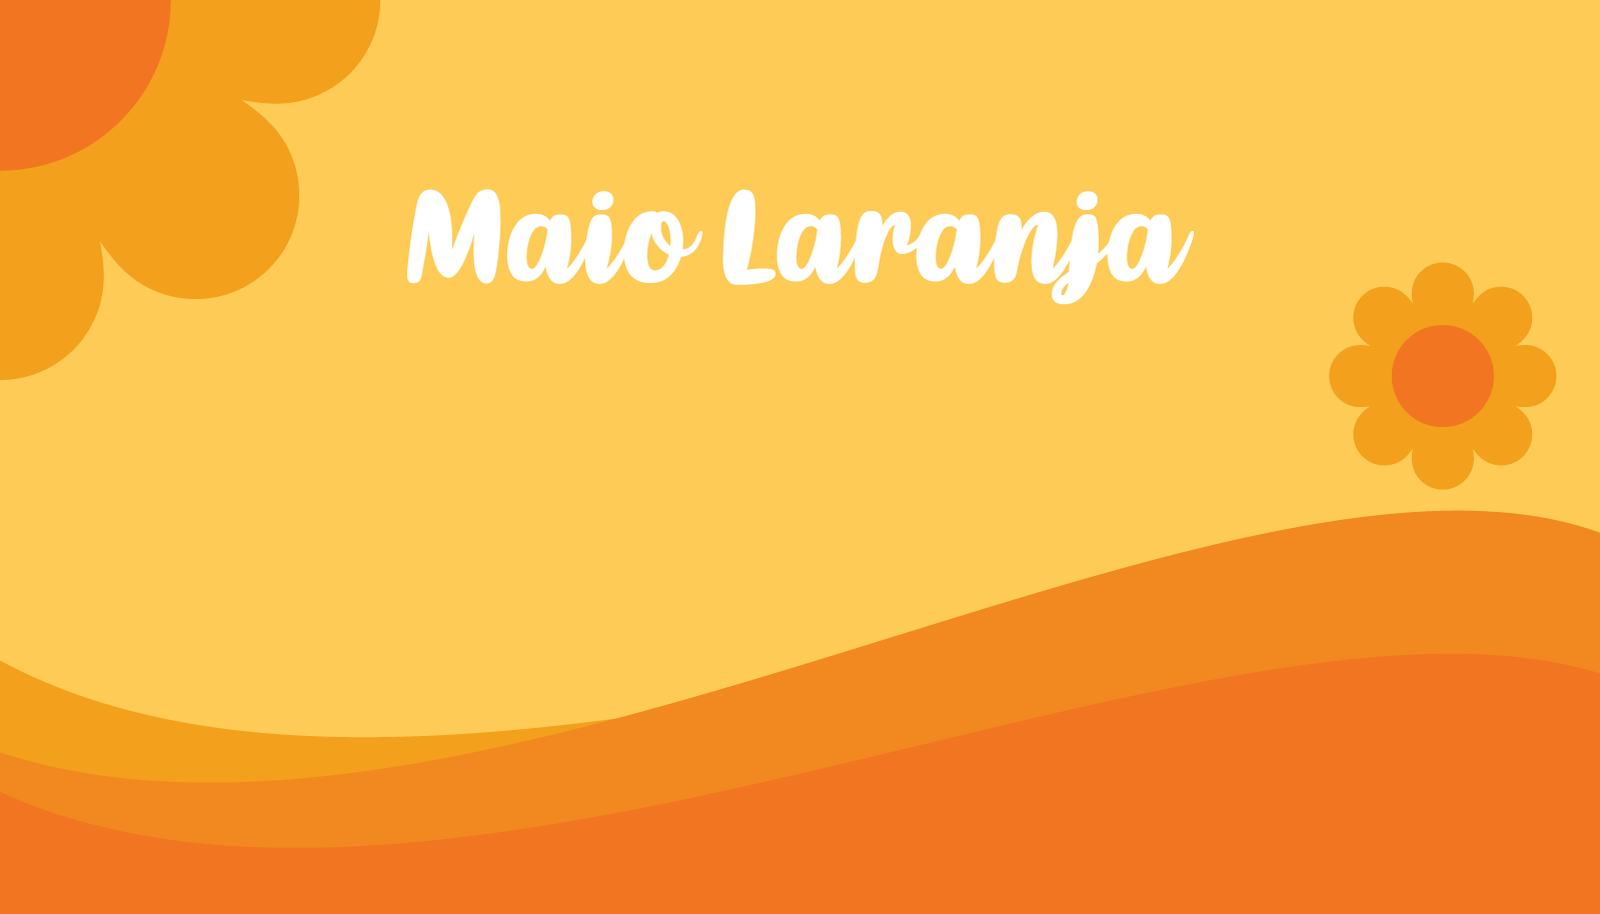 Maio Laranja background campaign against violence research of children 18 ma Logo Template